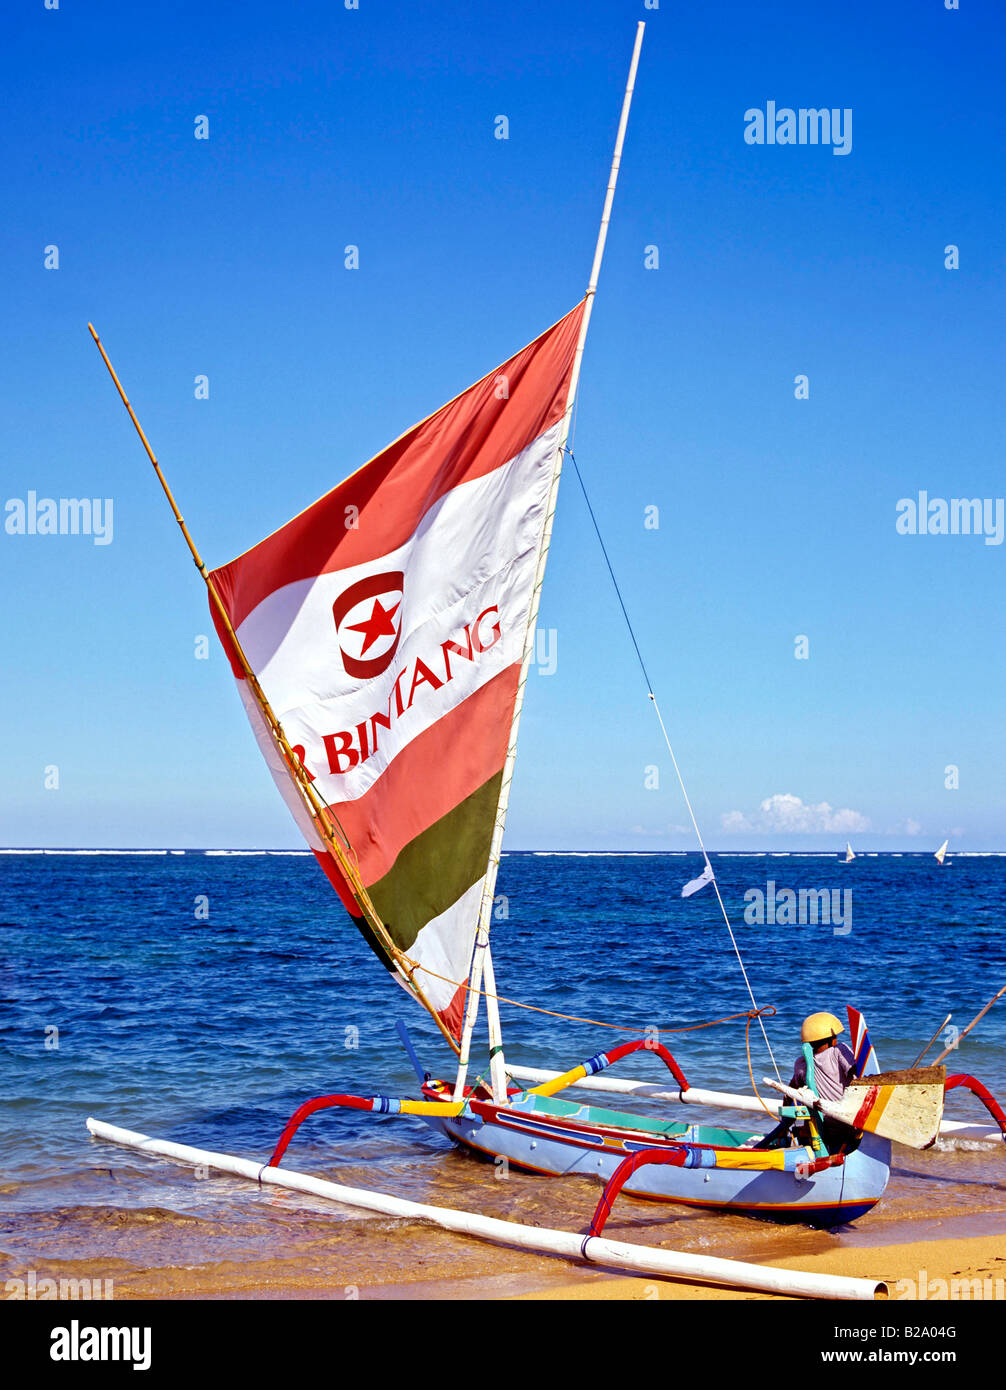 Outrigger boat Bali Indonesia Date 28 03 2008 Ref WP B548 111653 0050 COMPULSORY CREDIT World Pictures Photoshot Stock Photo